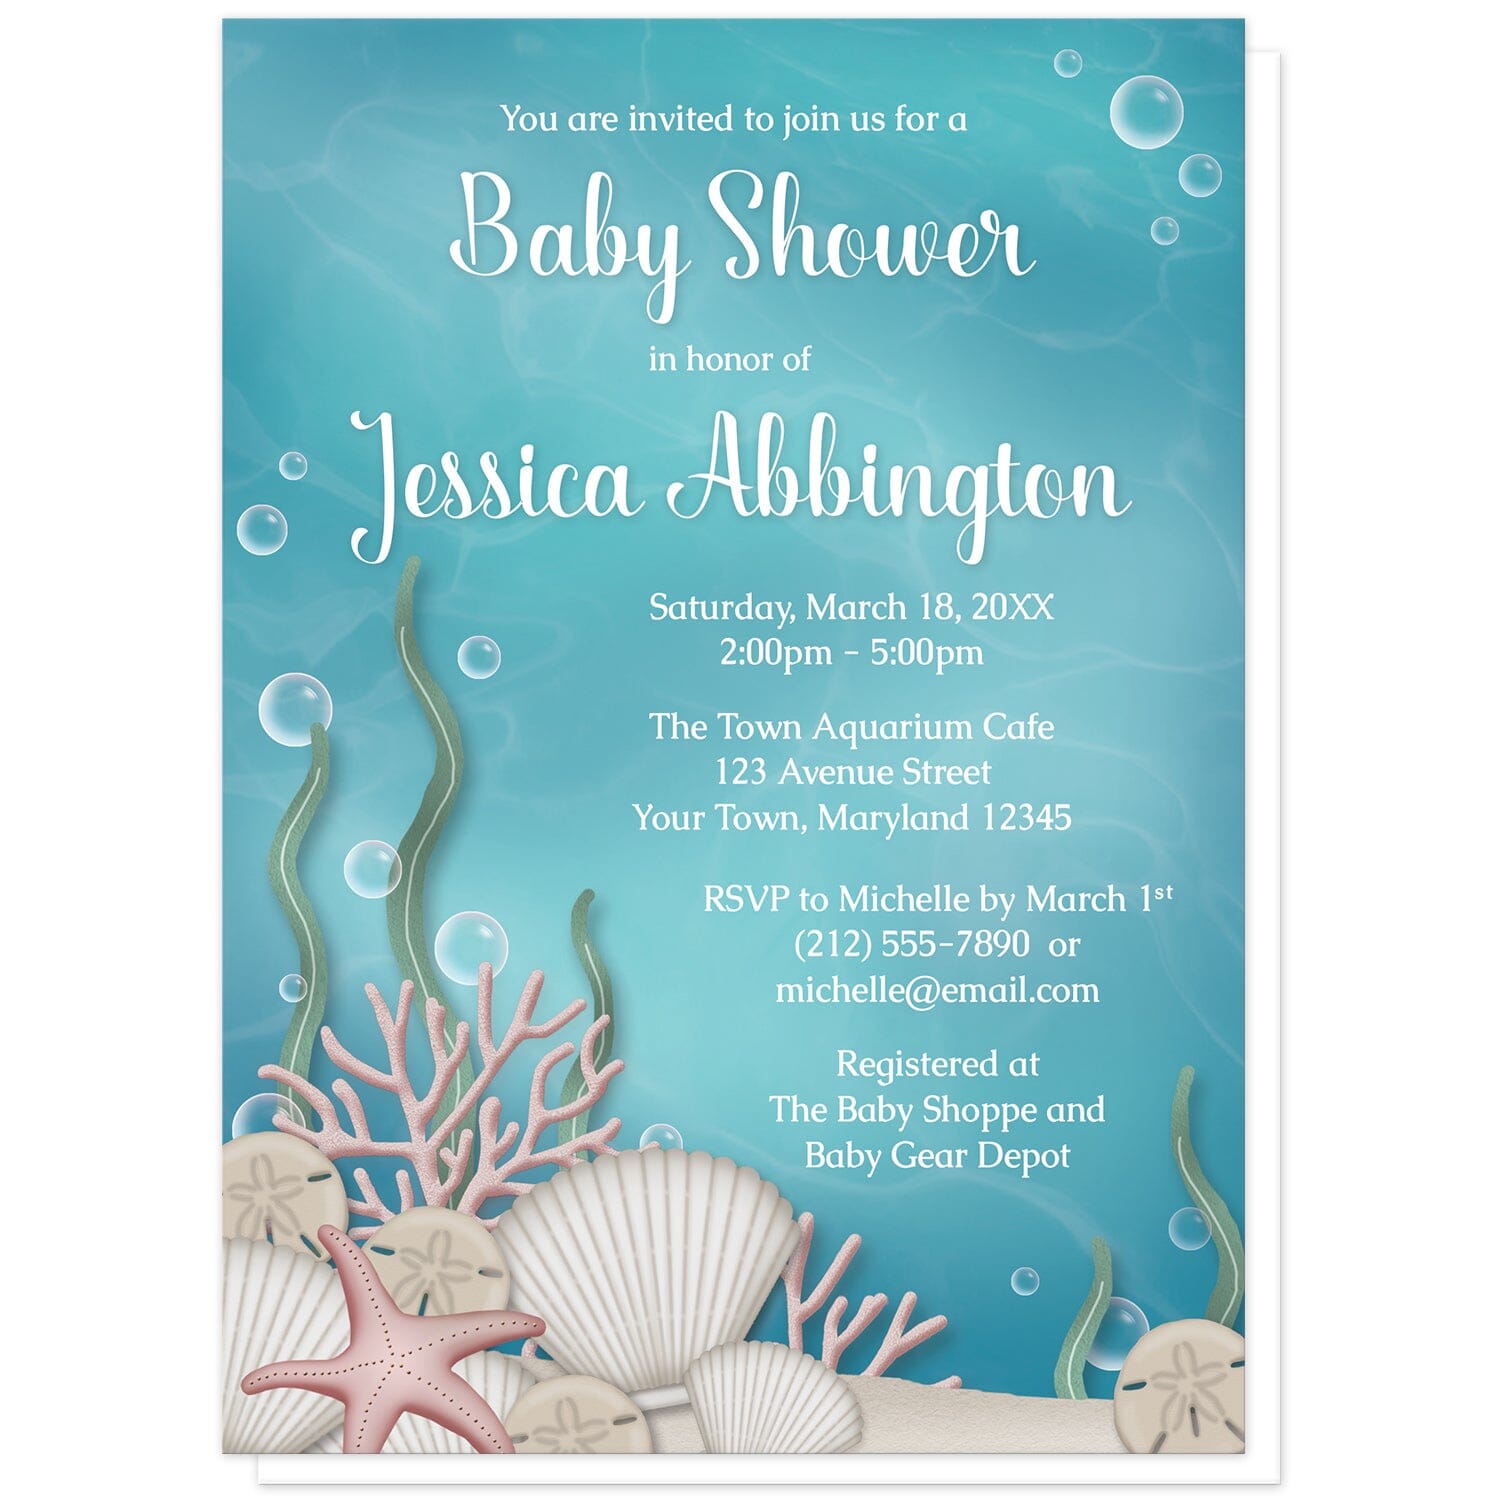 Whimsical Under the Sea Baby Shower Invitations at Artistically Invited. Beautifully illustrated whimsical under the sea baby shower invitations with an under the sea or aquarium theme. They are designed with a sandy seabed, assorted seashells, bubbles, coral, and kelp with an underwater aqua blue water background. Your personalized baby shower celebration details are custom printed in white over the water background.